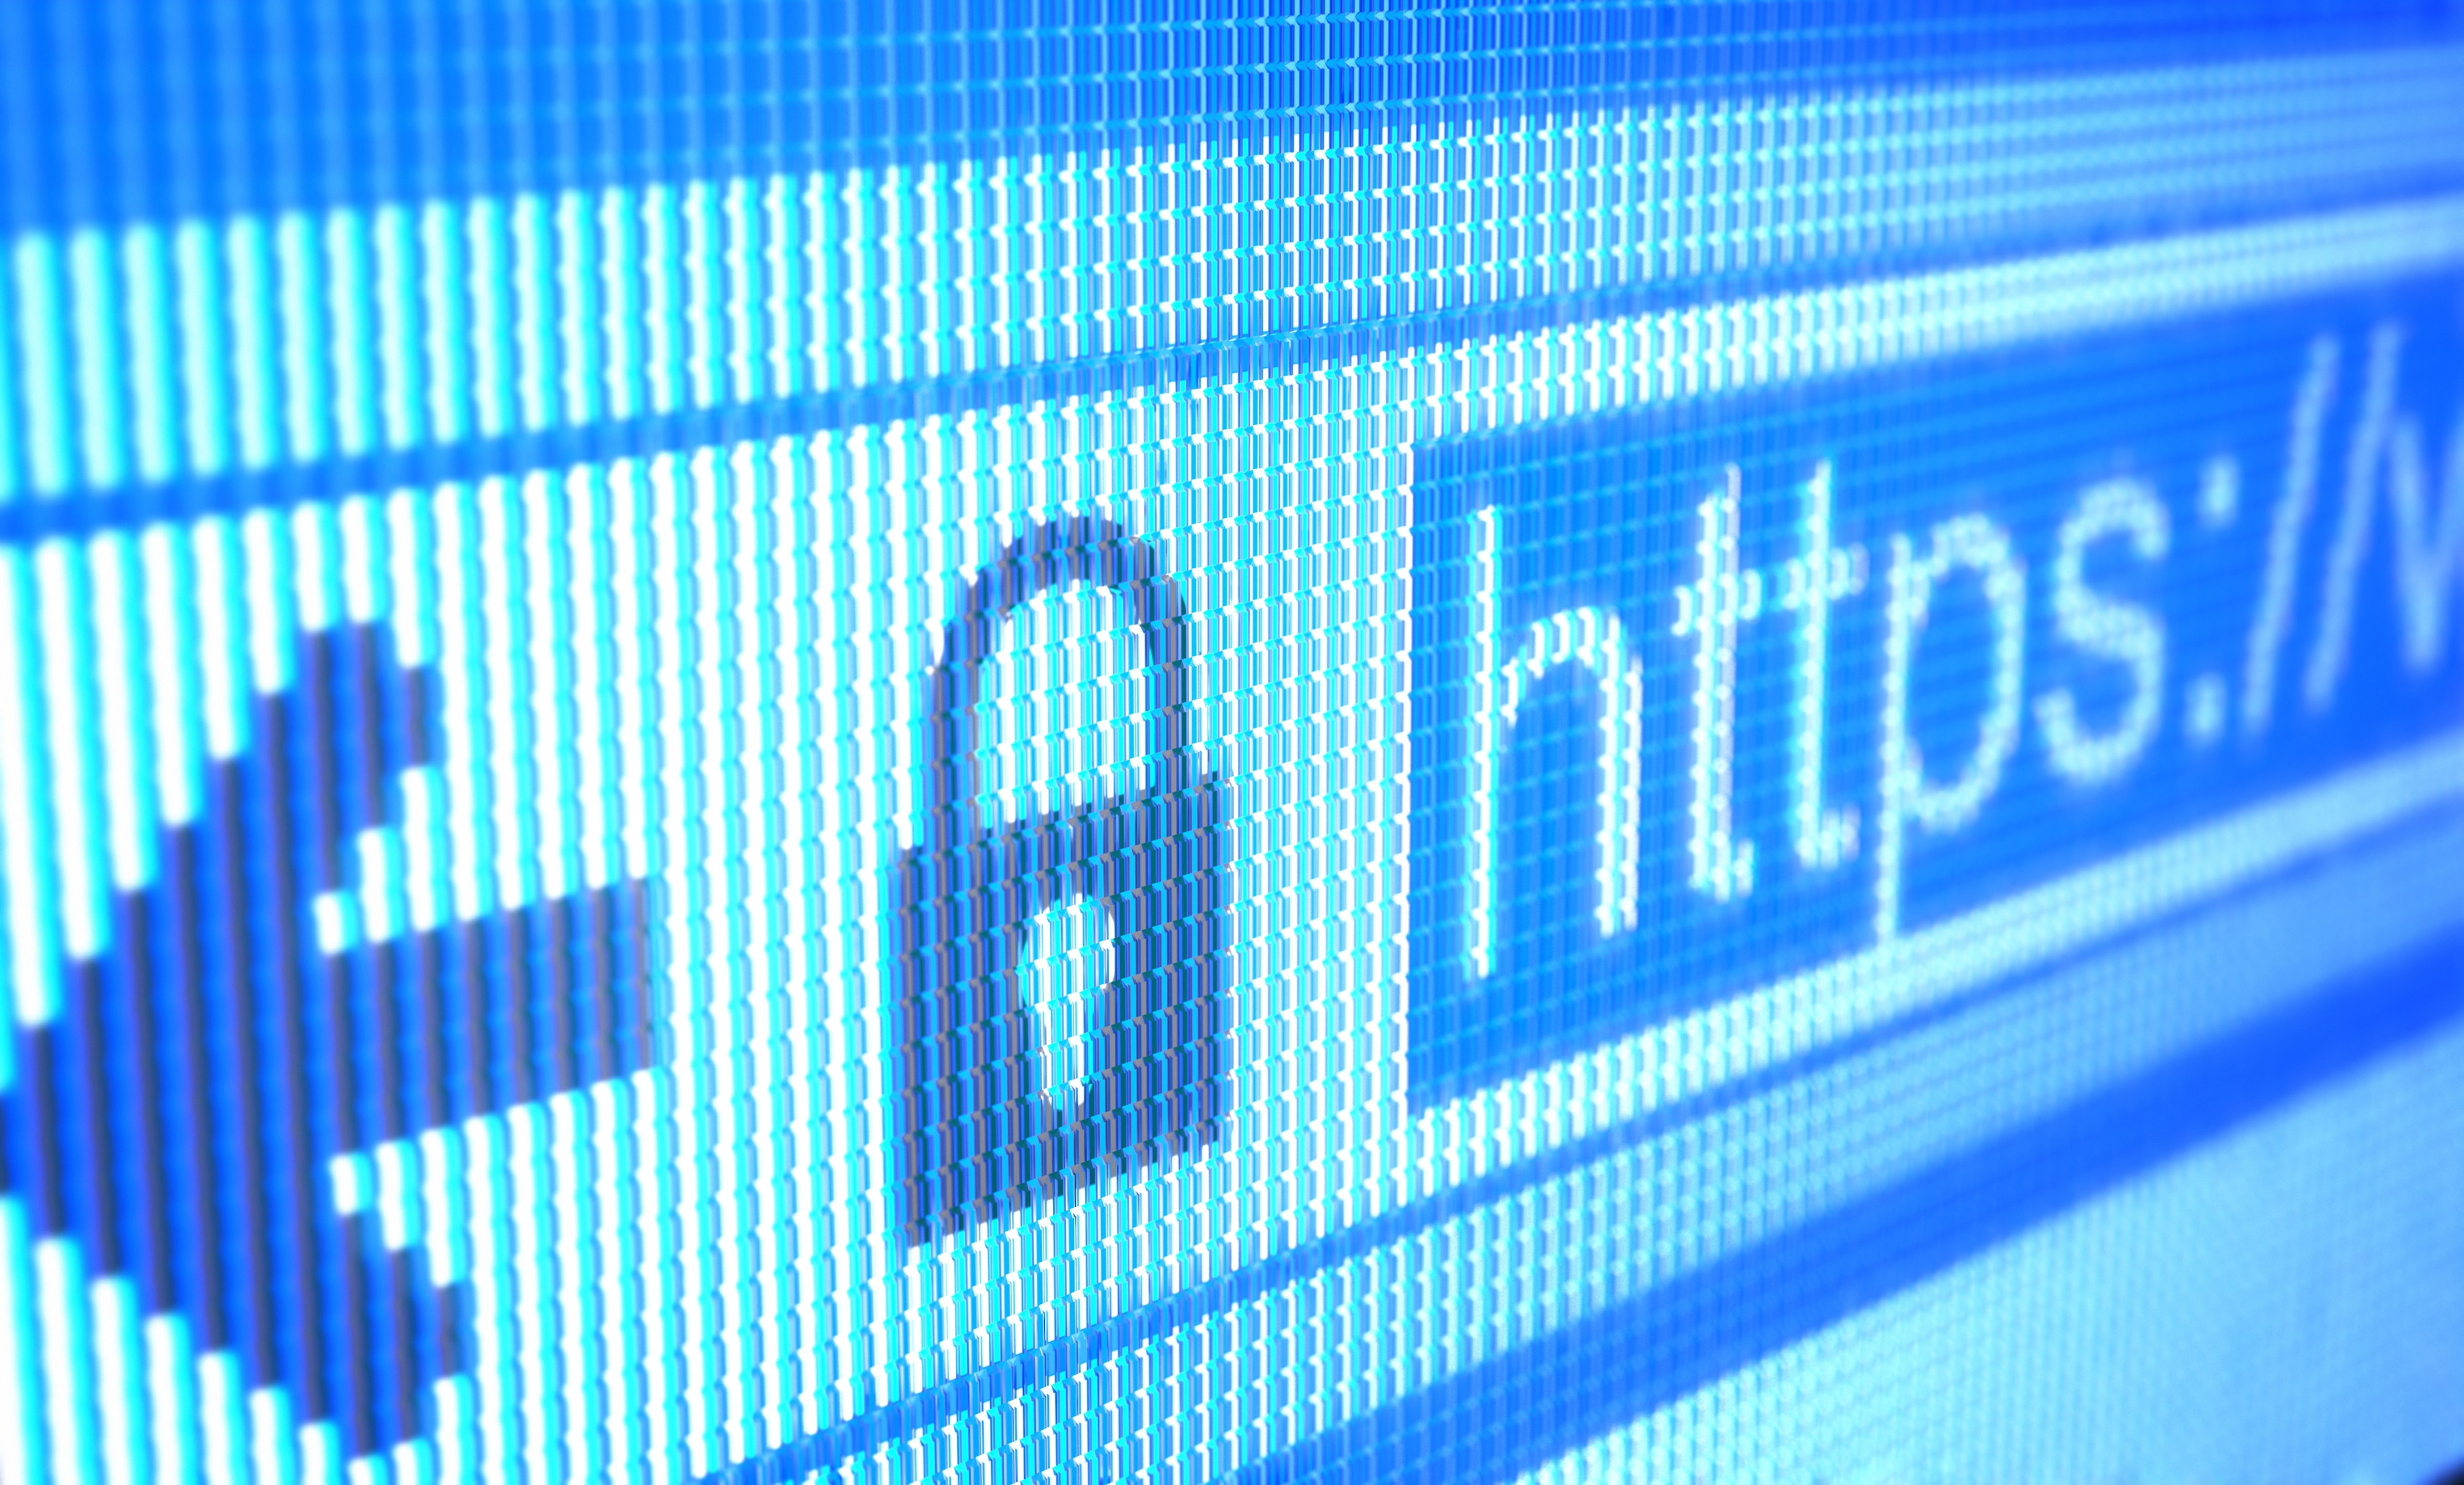 The little lock icon (HTTPS) signaling that we were on a secure website and that all our passwords, personal emails, and credit card information was safe, was making that private information accessible hackers. (KTSDESIGN—Getty Images)